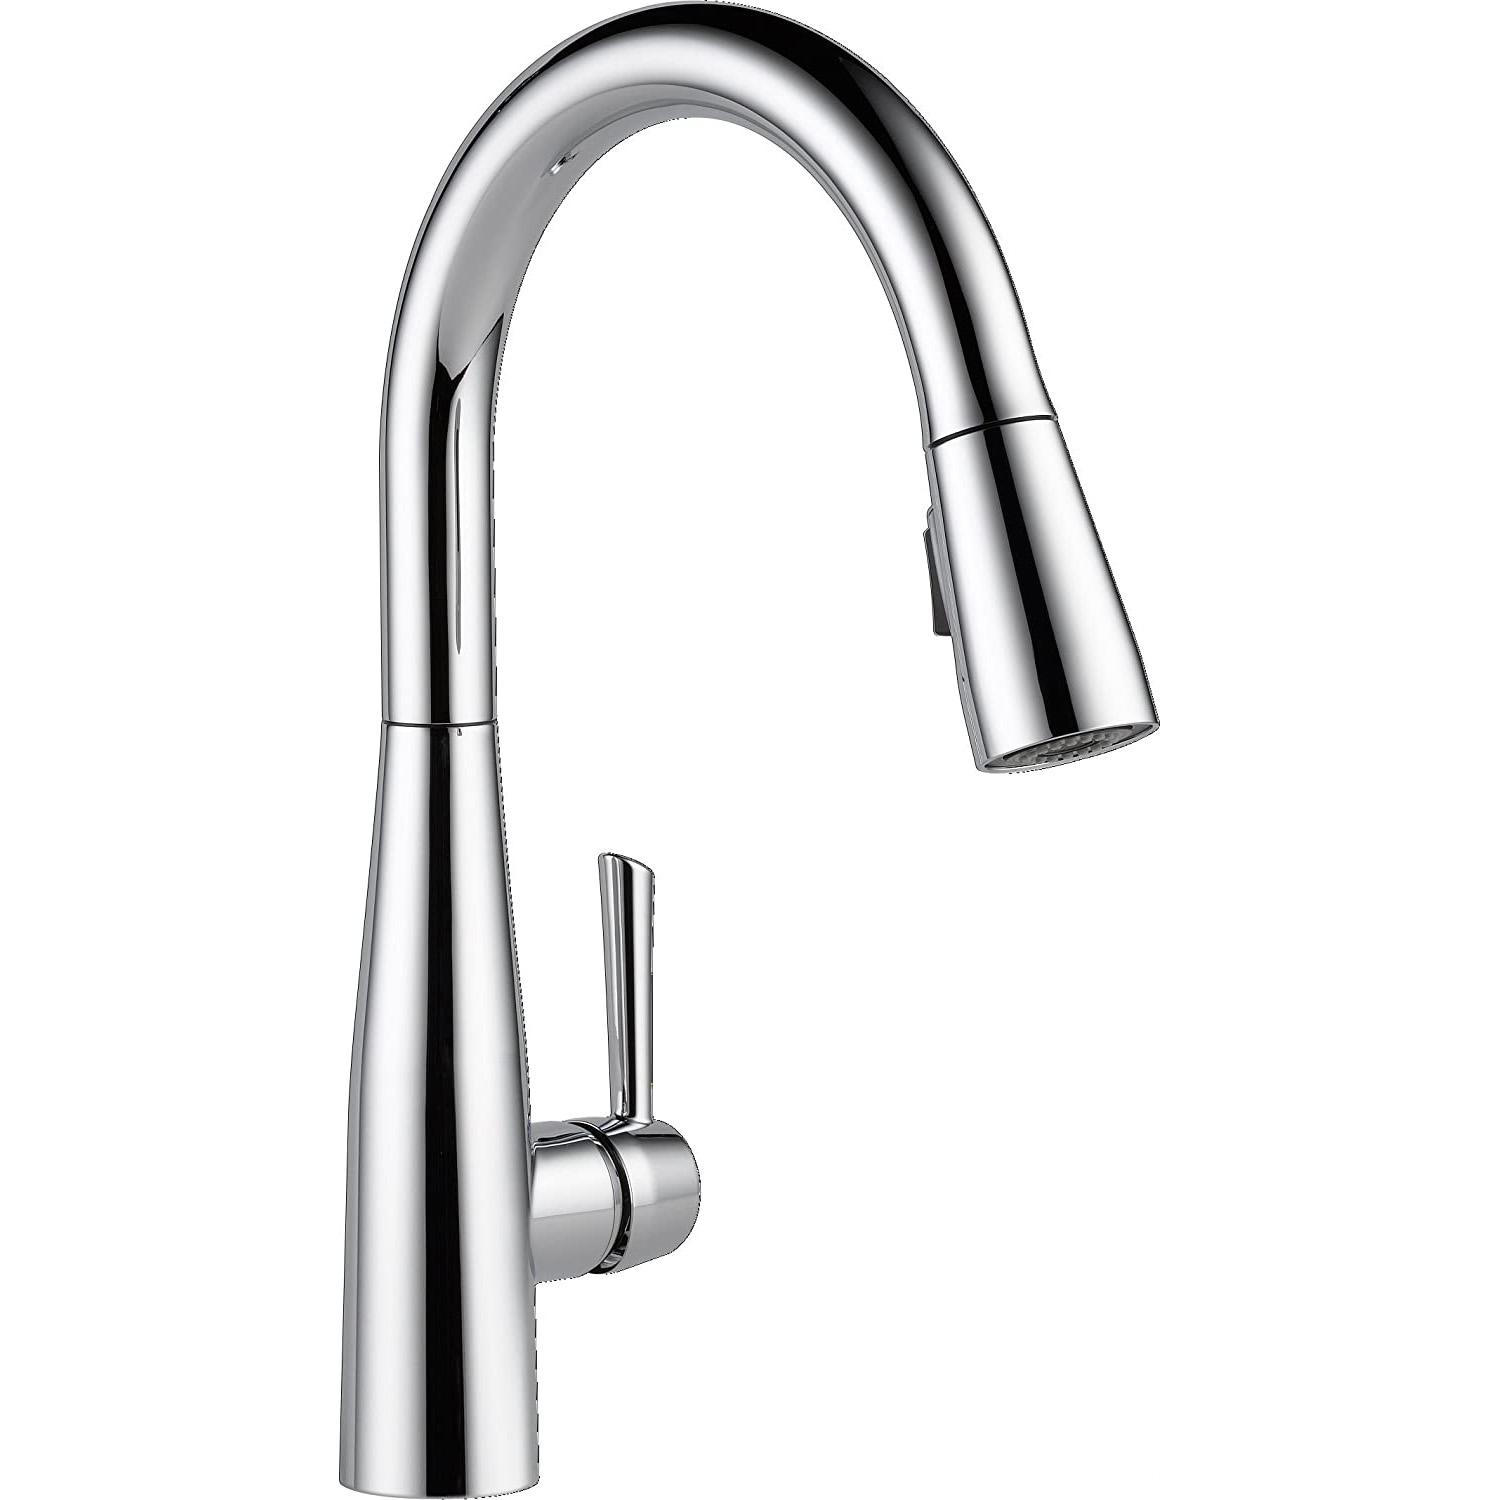 Delta Essa Single-Handle Kitchen Sink Faucet for $137.27 Shipped